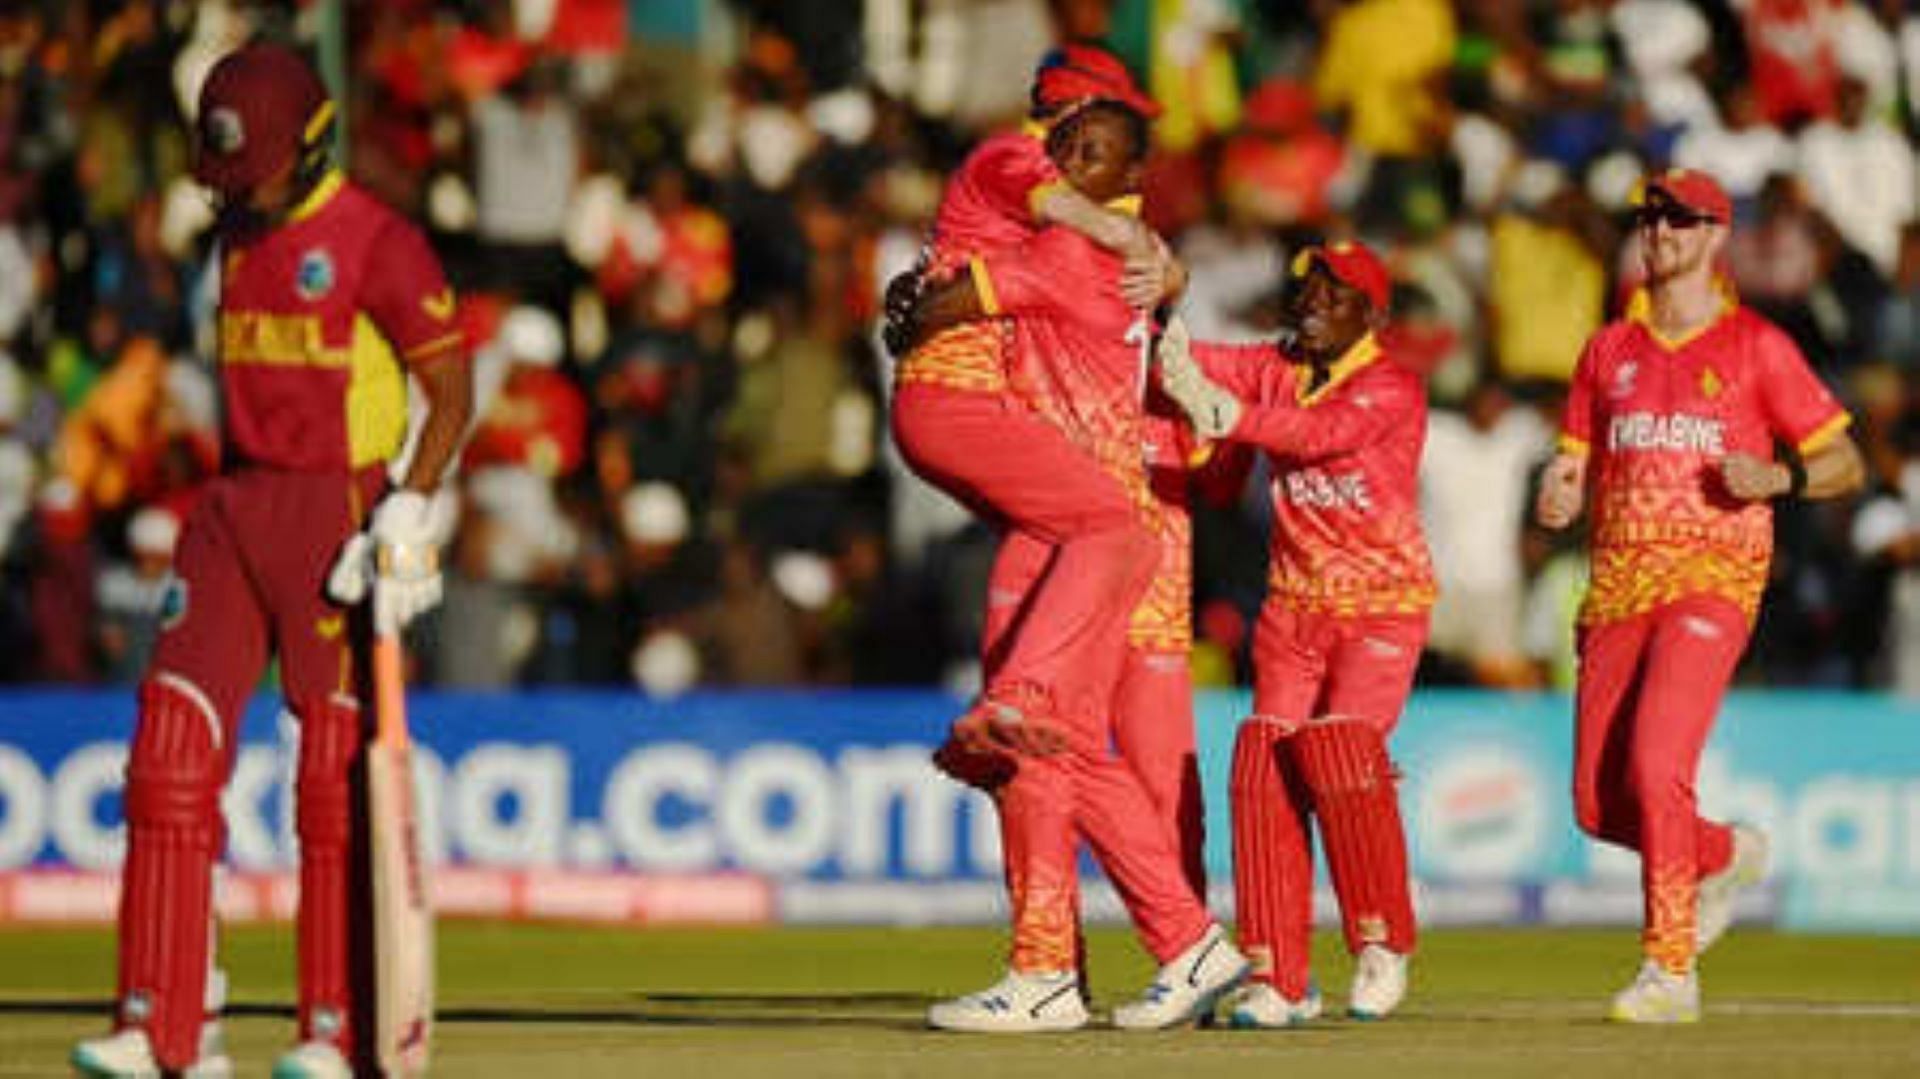 Victory against the West Indies was the highlight for Zimbabwe in the World Cup Qualifiers.